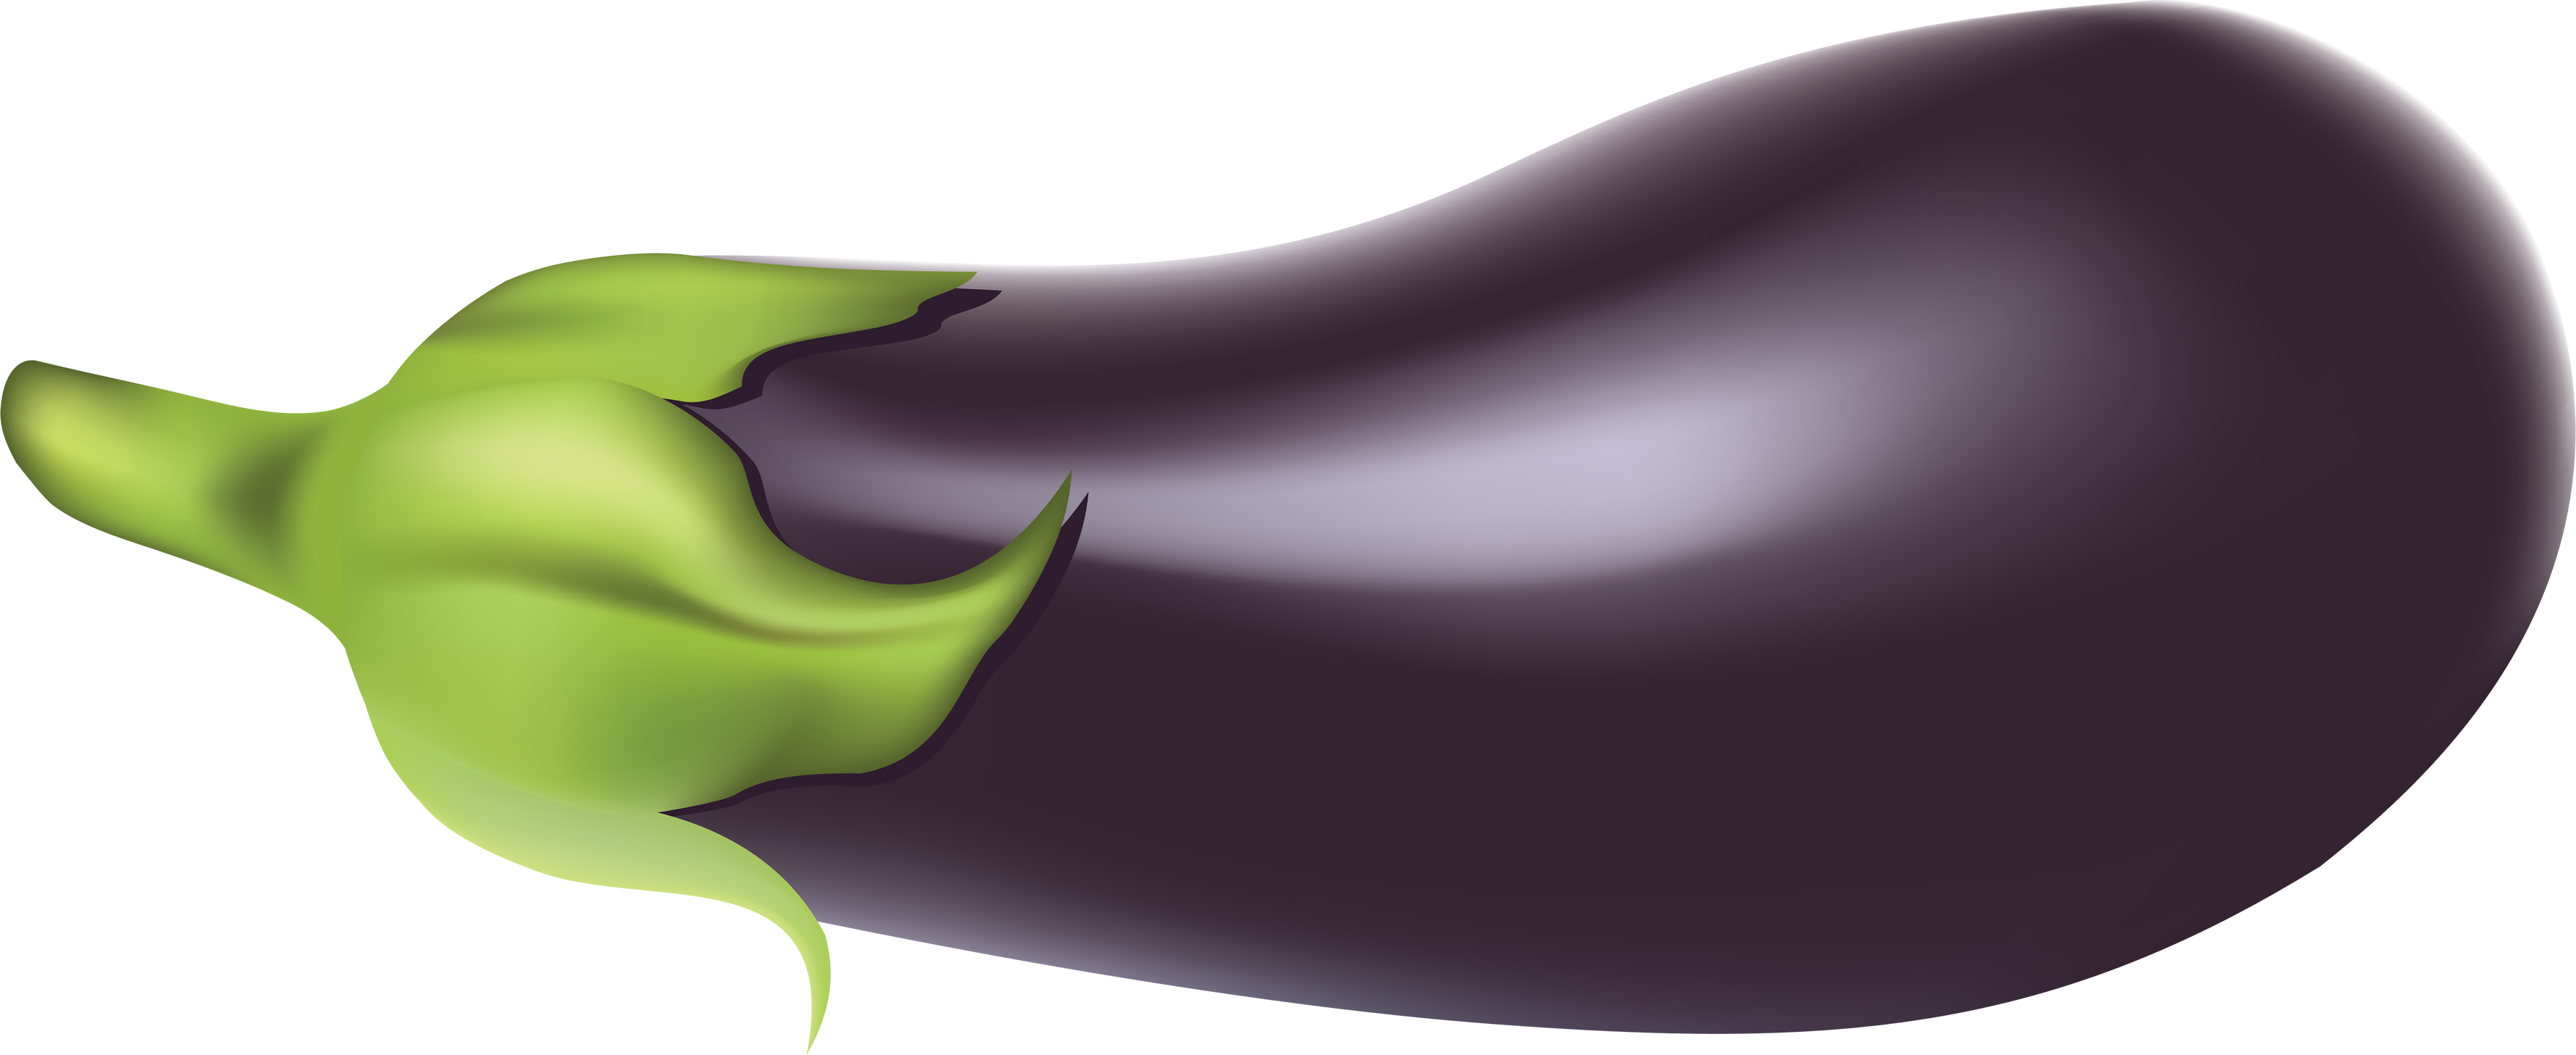 Aubergine PNG Telecharger Fond